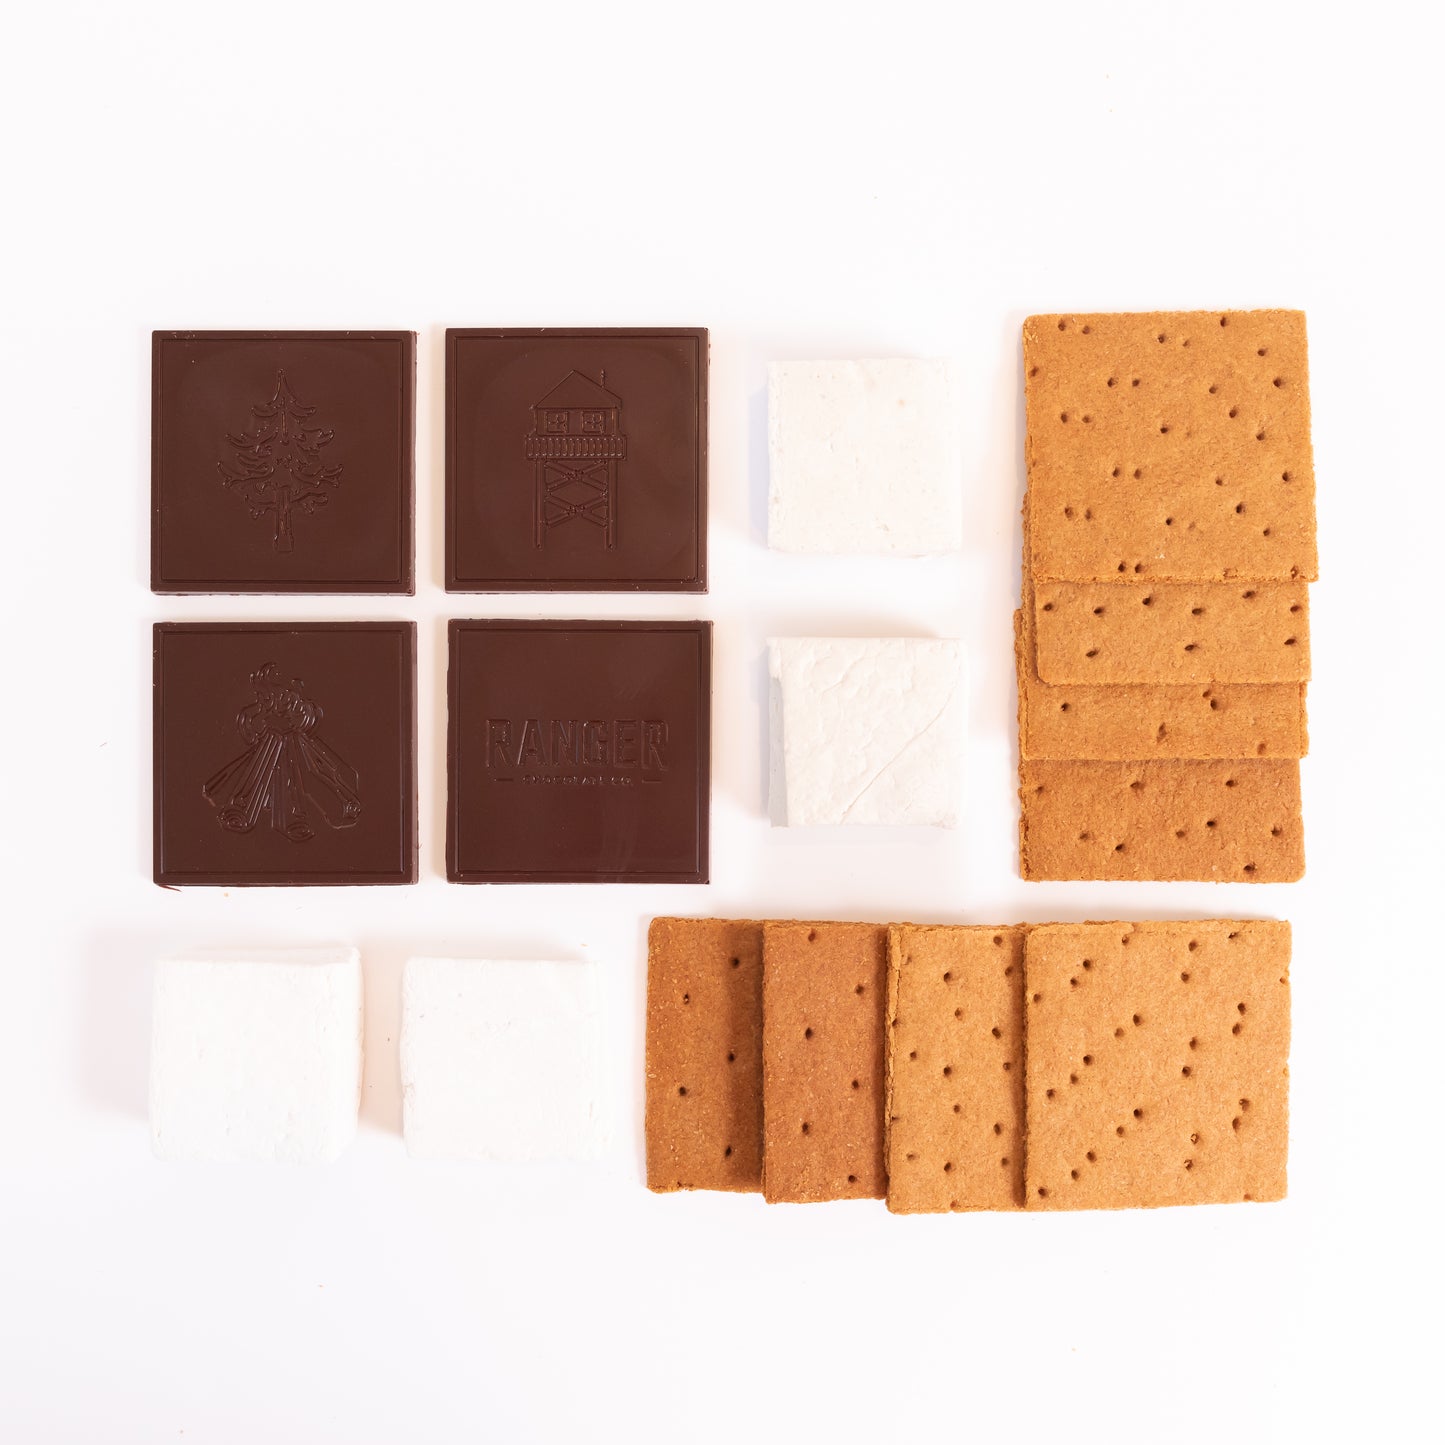 S'mores Kit